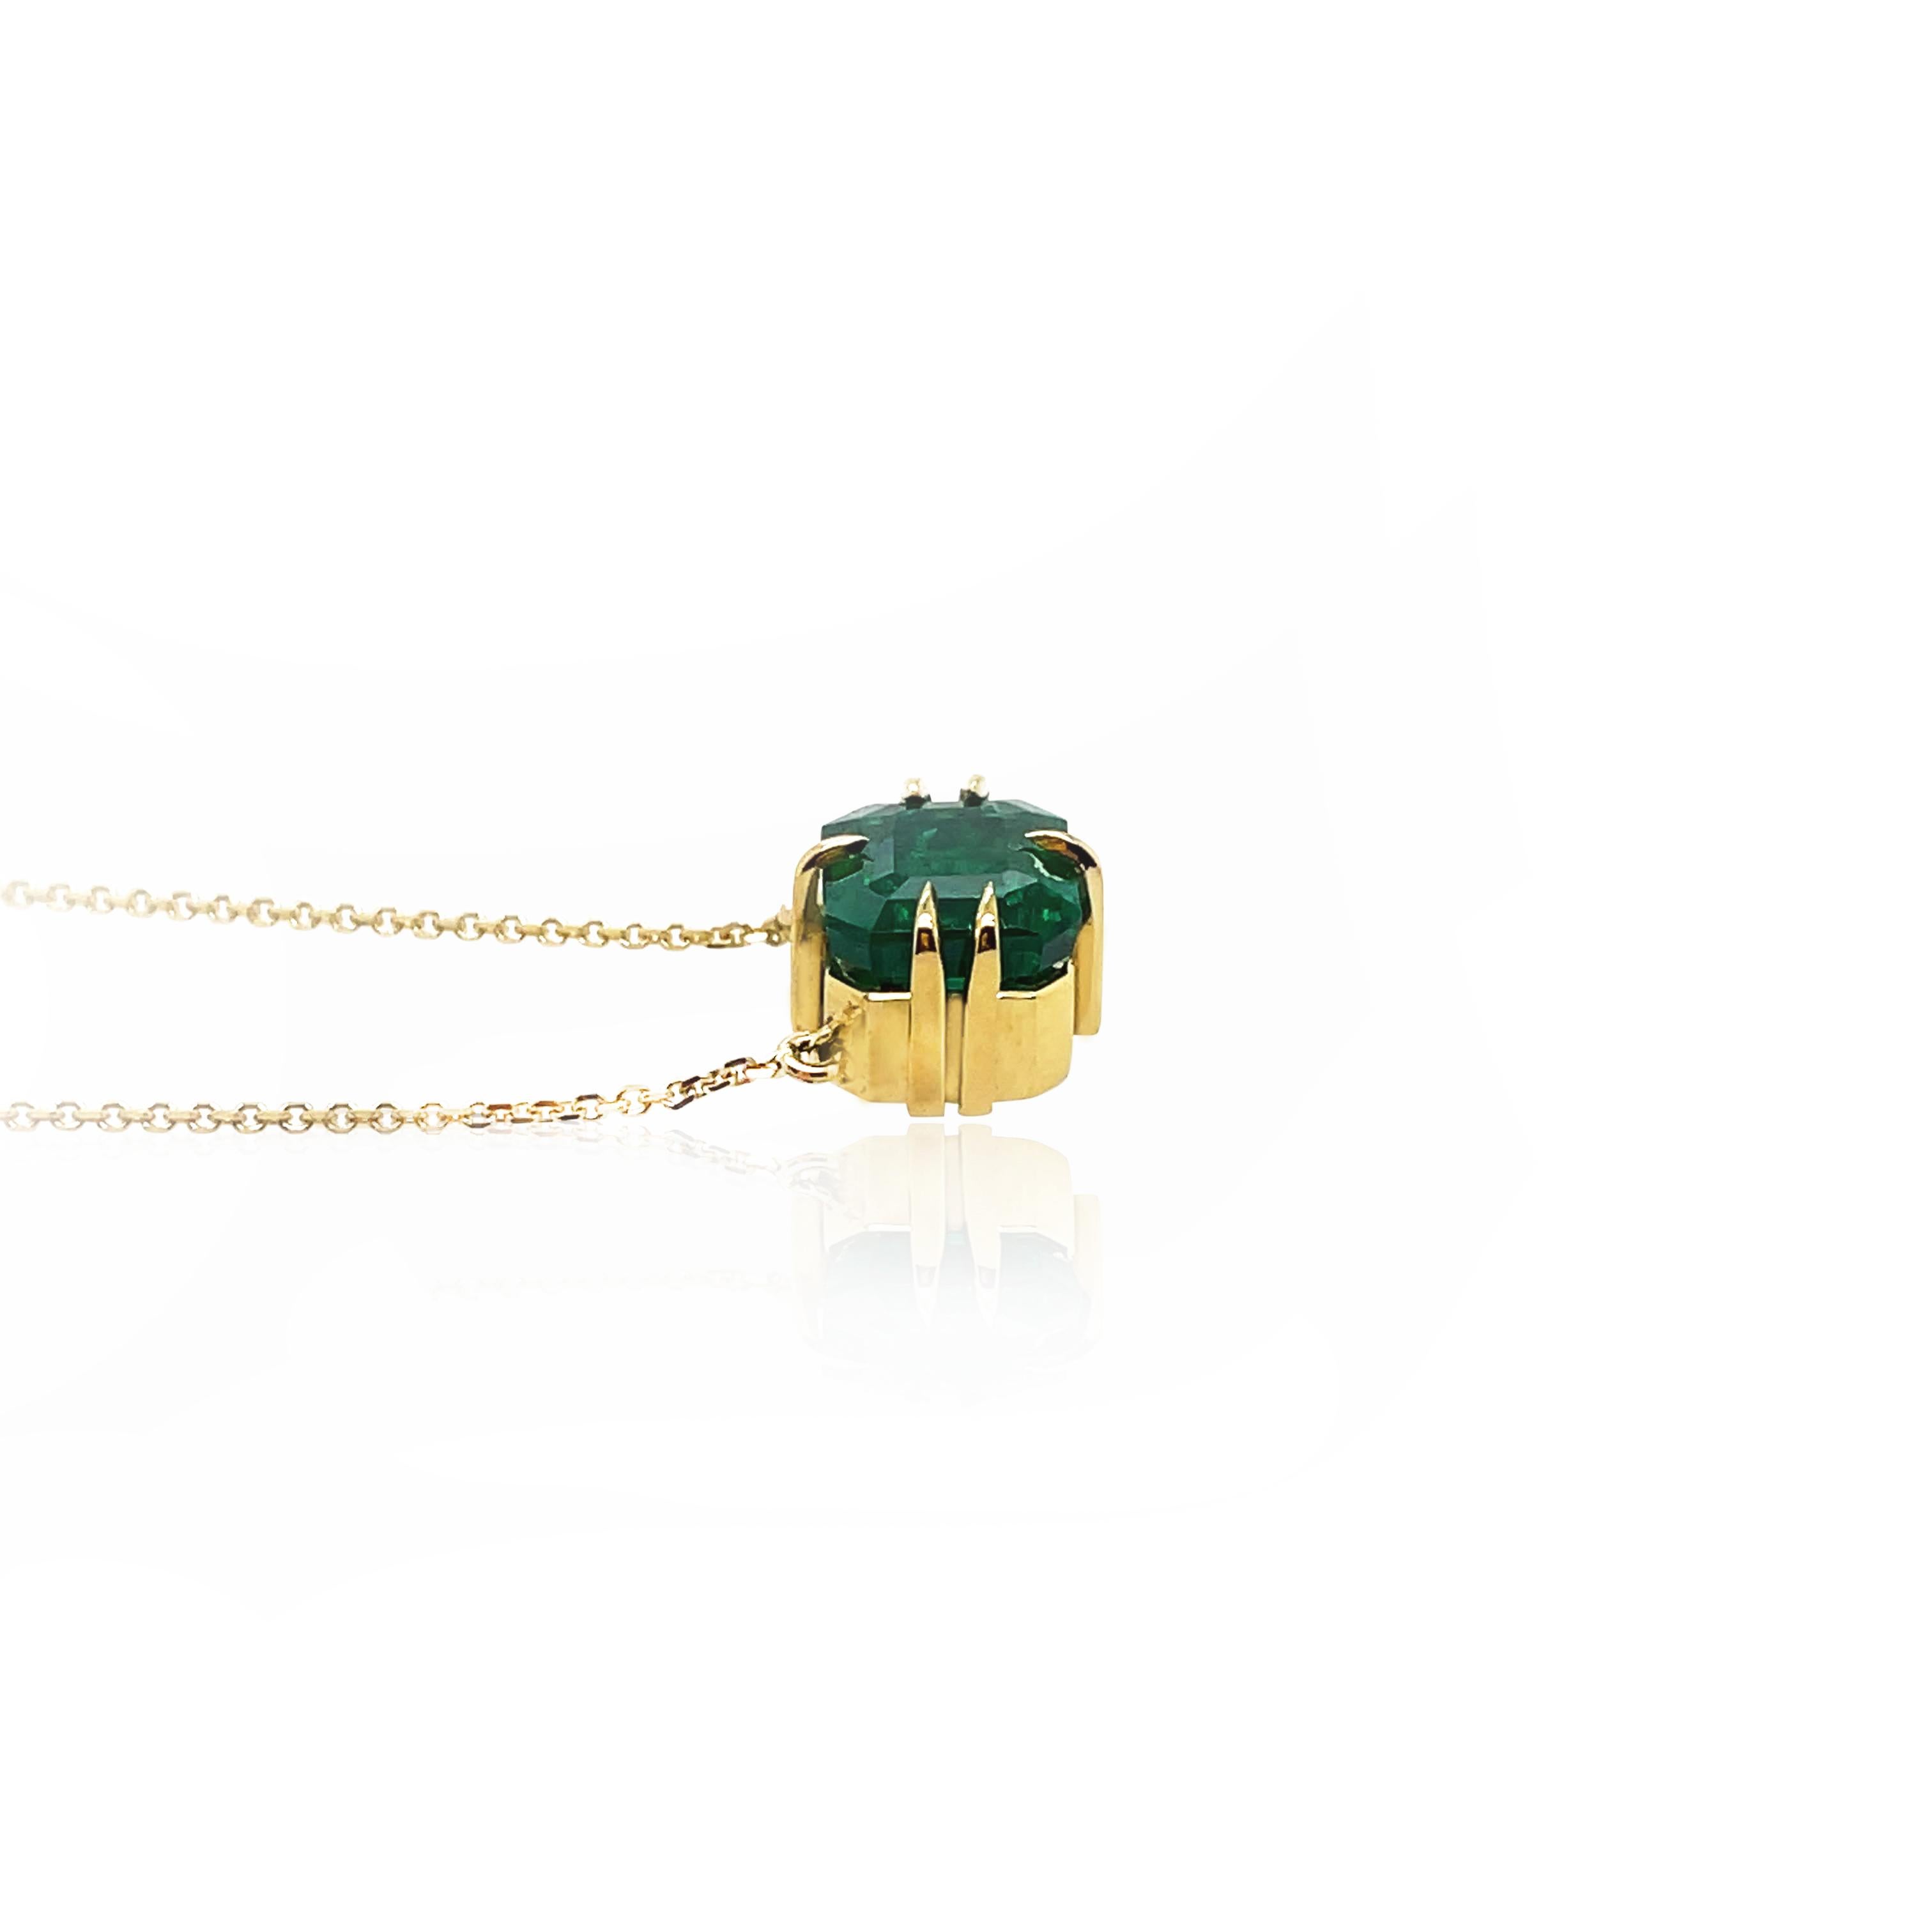 2.26ct Emerald necklace made in 18k yellow gold with chain  8